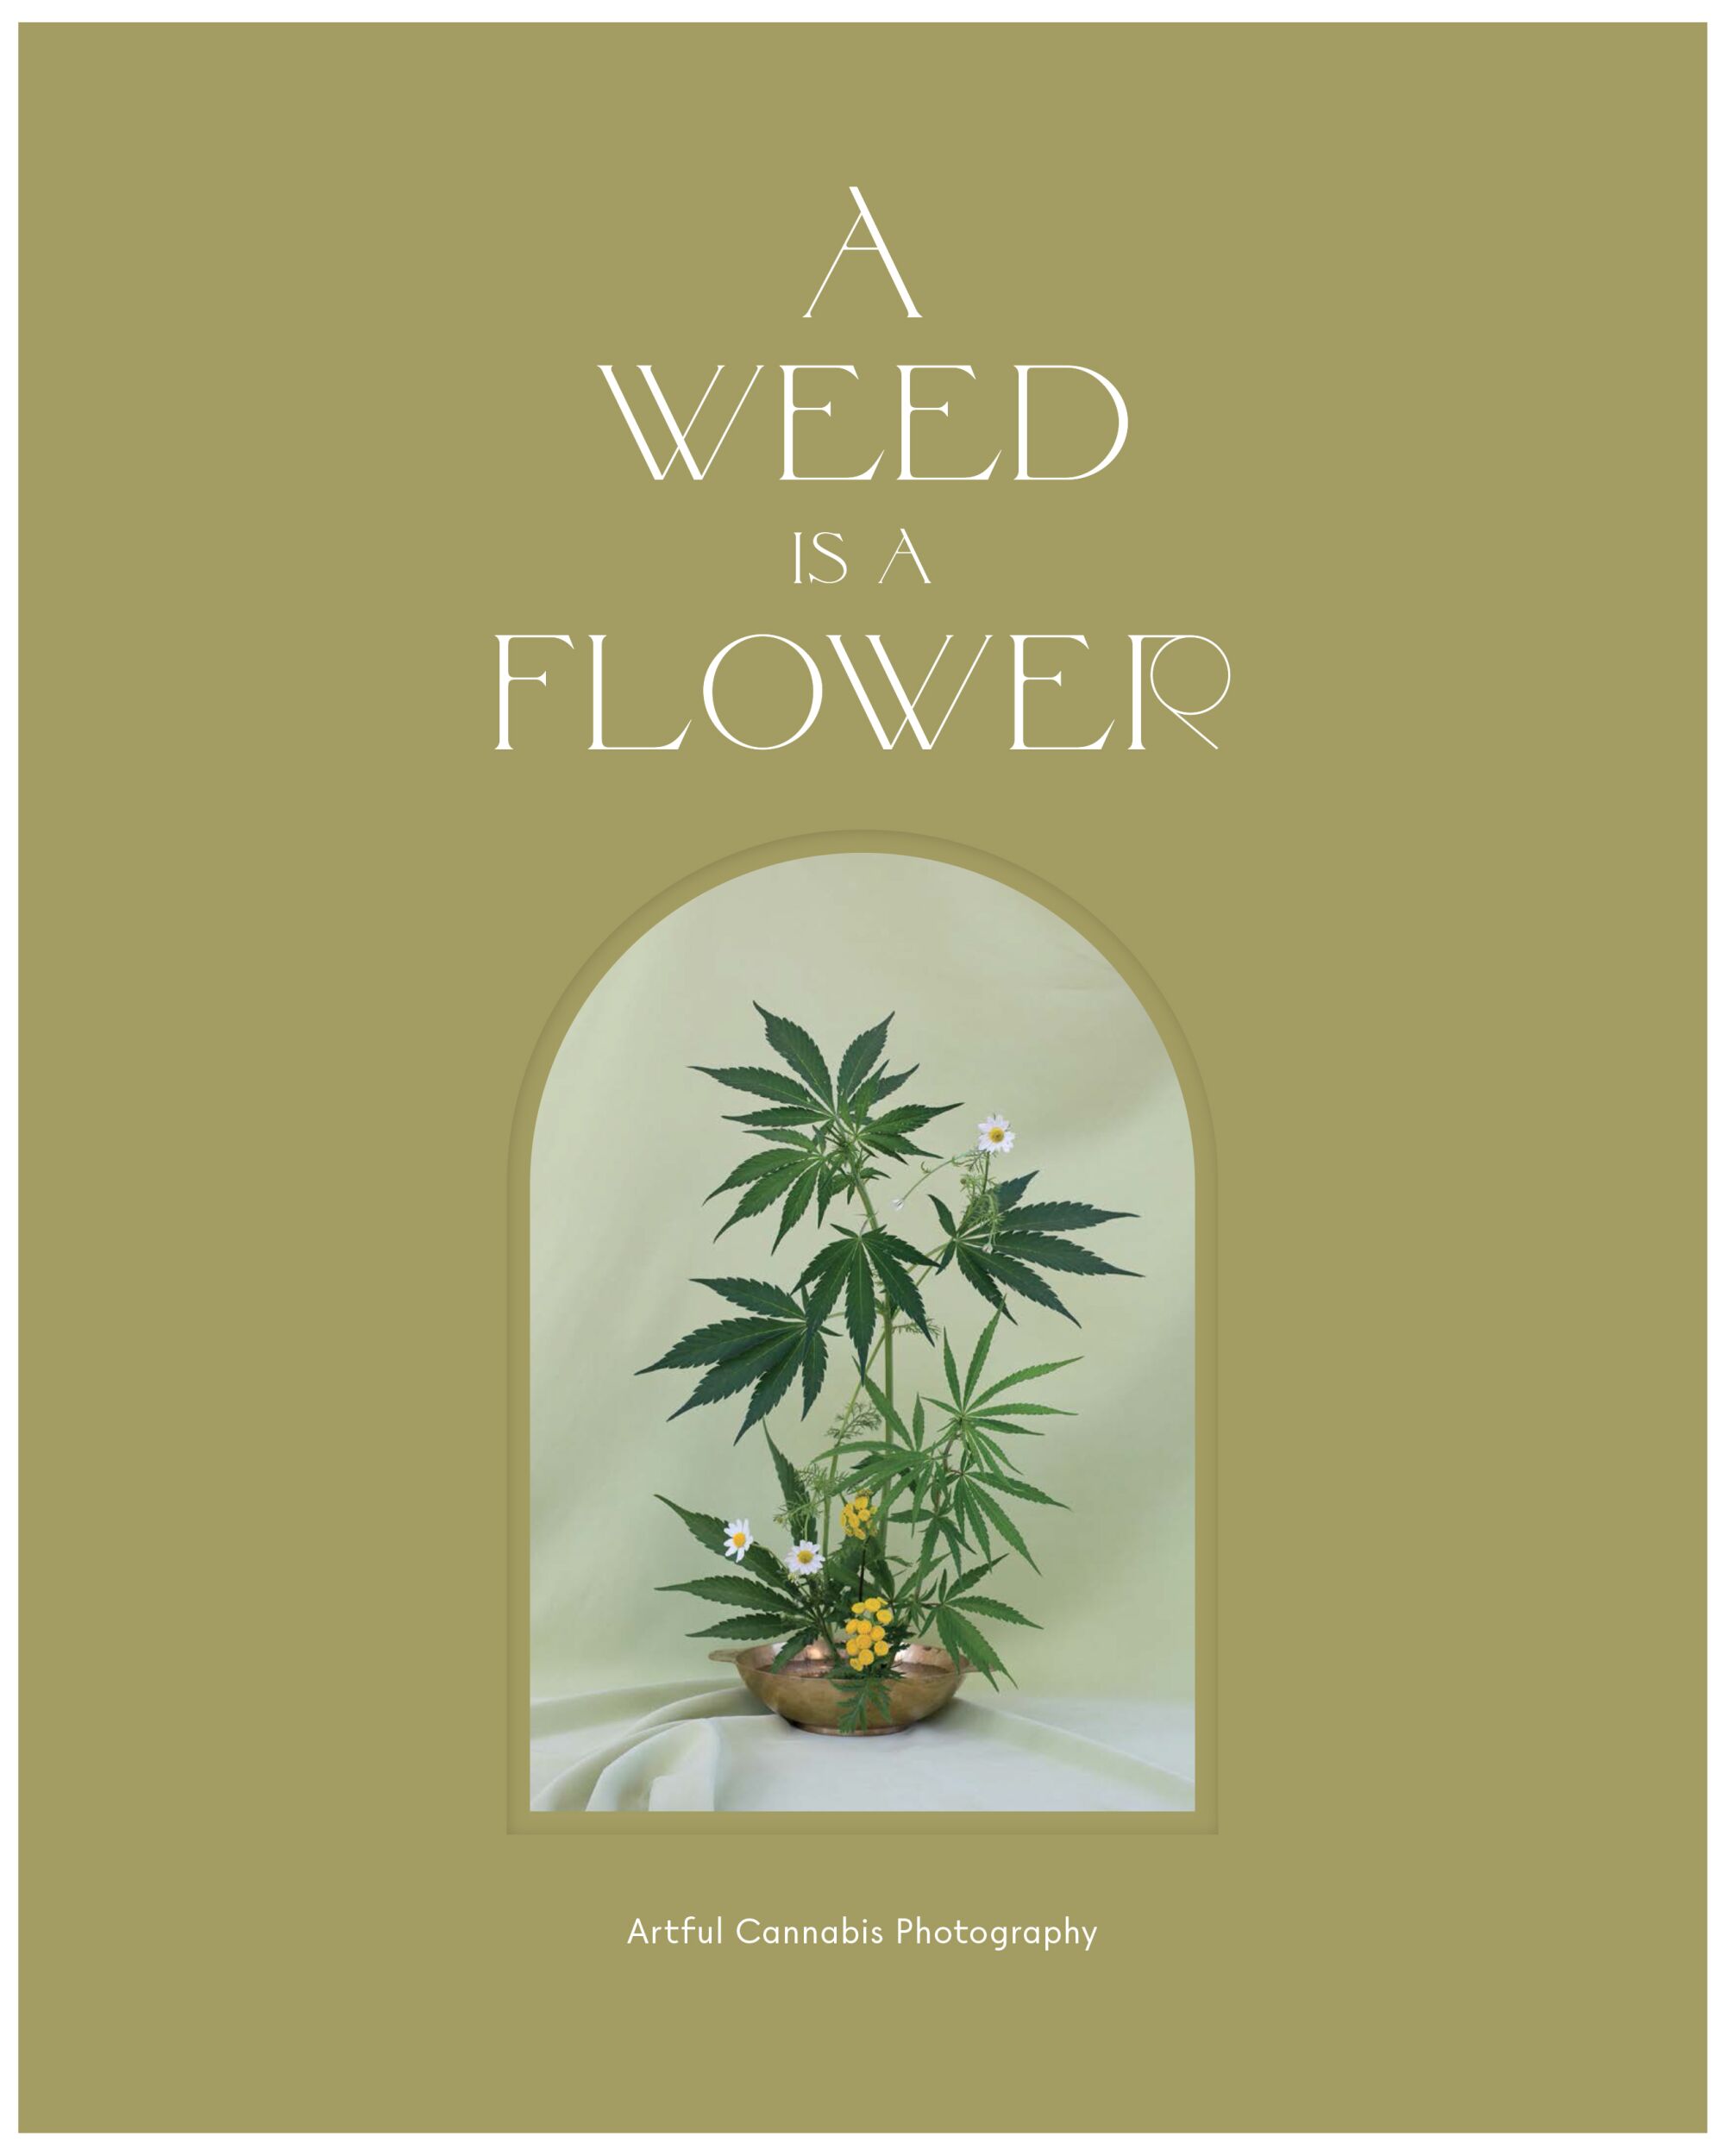 The book "A Weed Is a Flower"